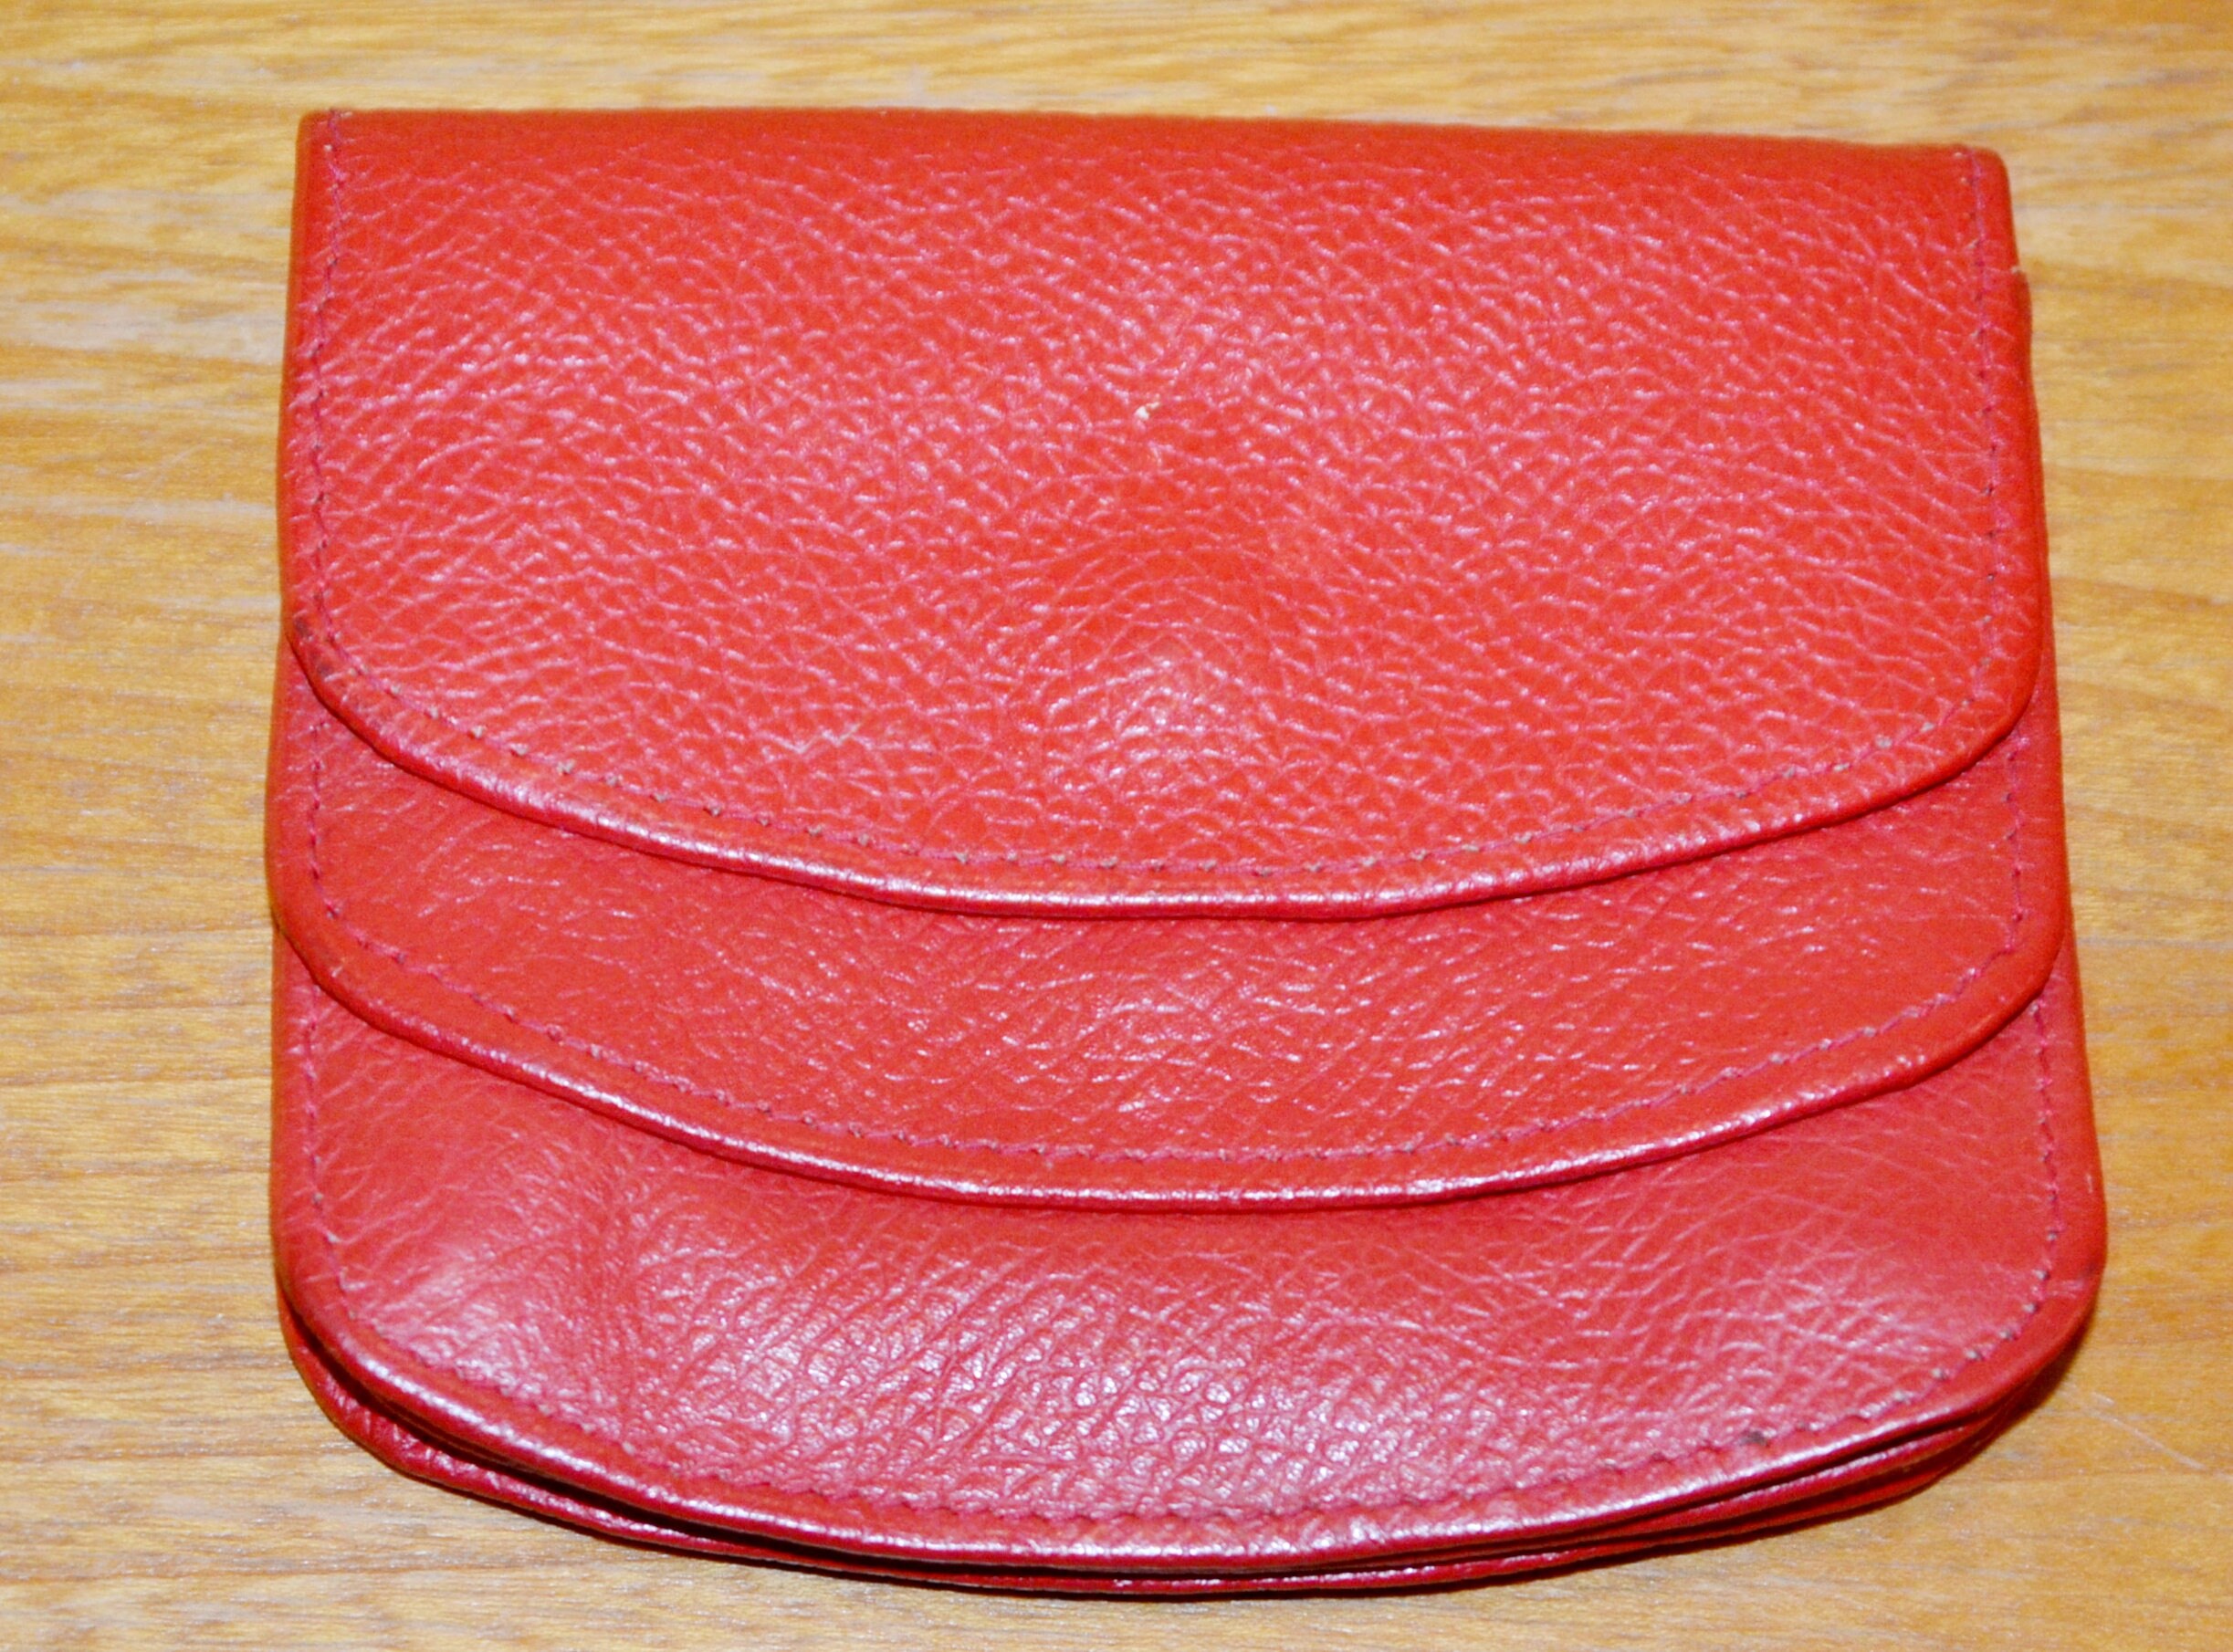 Refined Vintage Leather Change Wallet Red Fifties 50s Vintage Clothing  Retro Mid Century Second Hand Wear